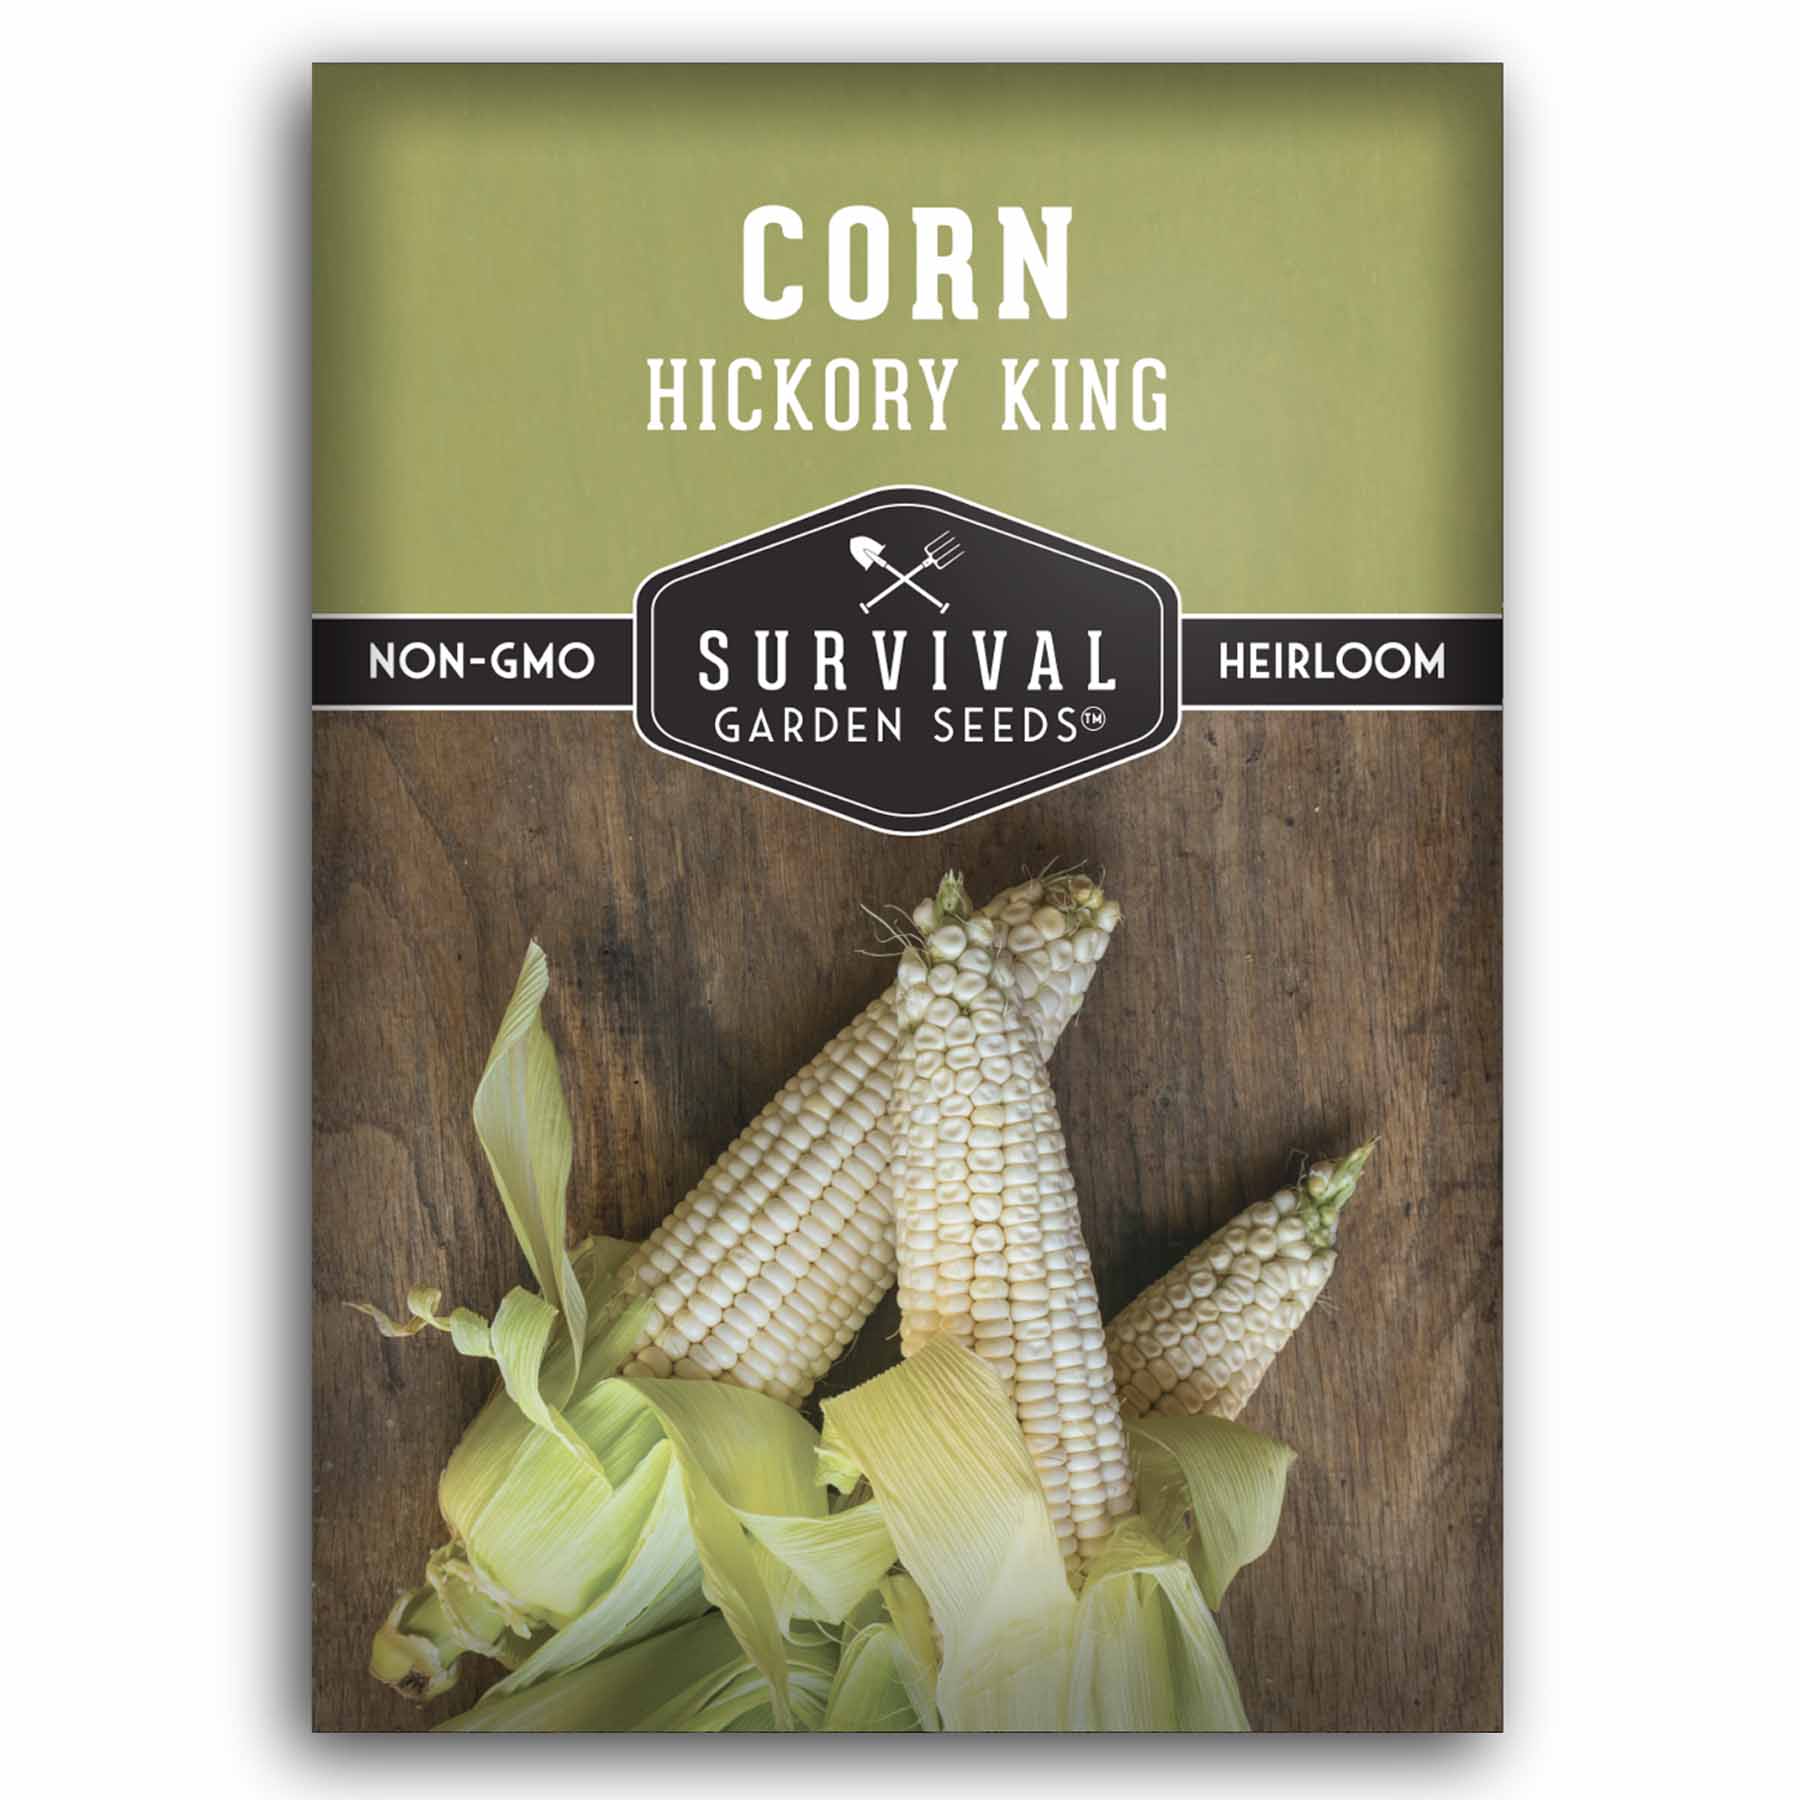 1 packet of Hickory King Corn seeds